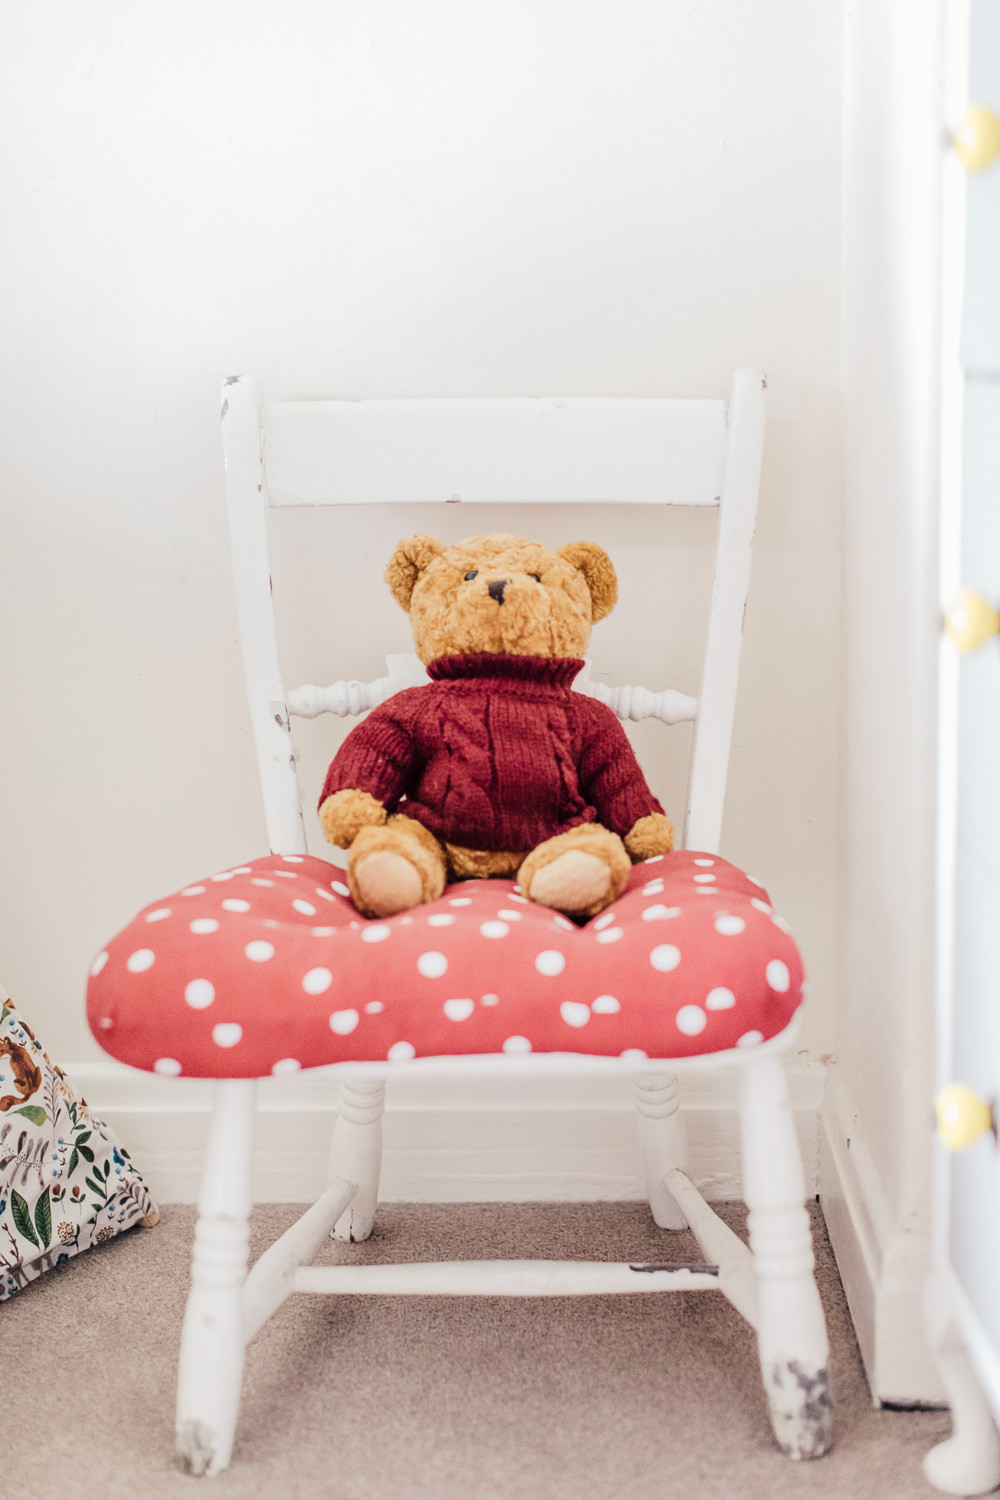 Bright toys in a woodland inspired children's bedroom in a rented property with homemade decor and details.